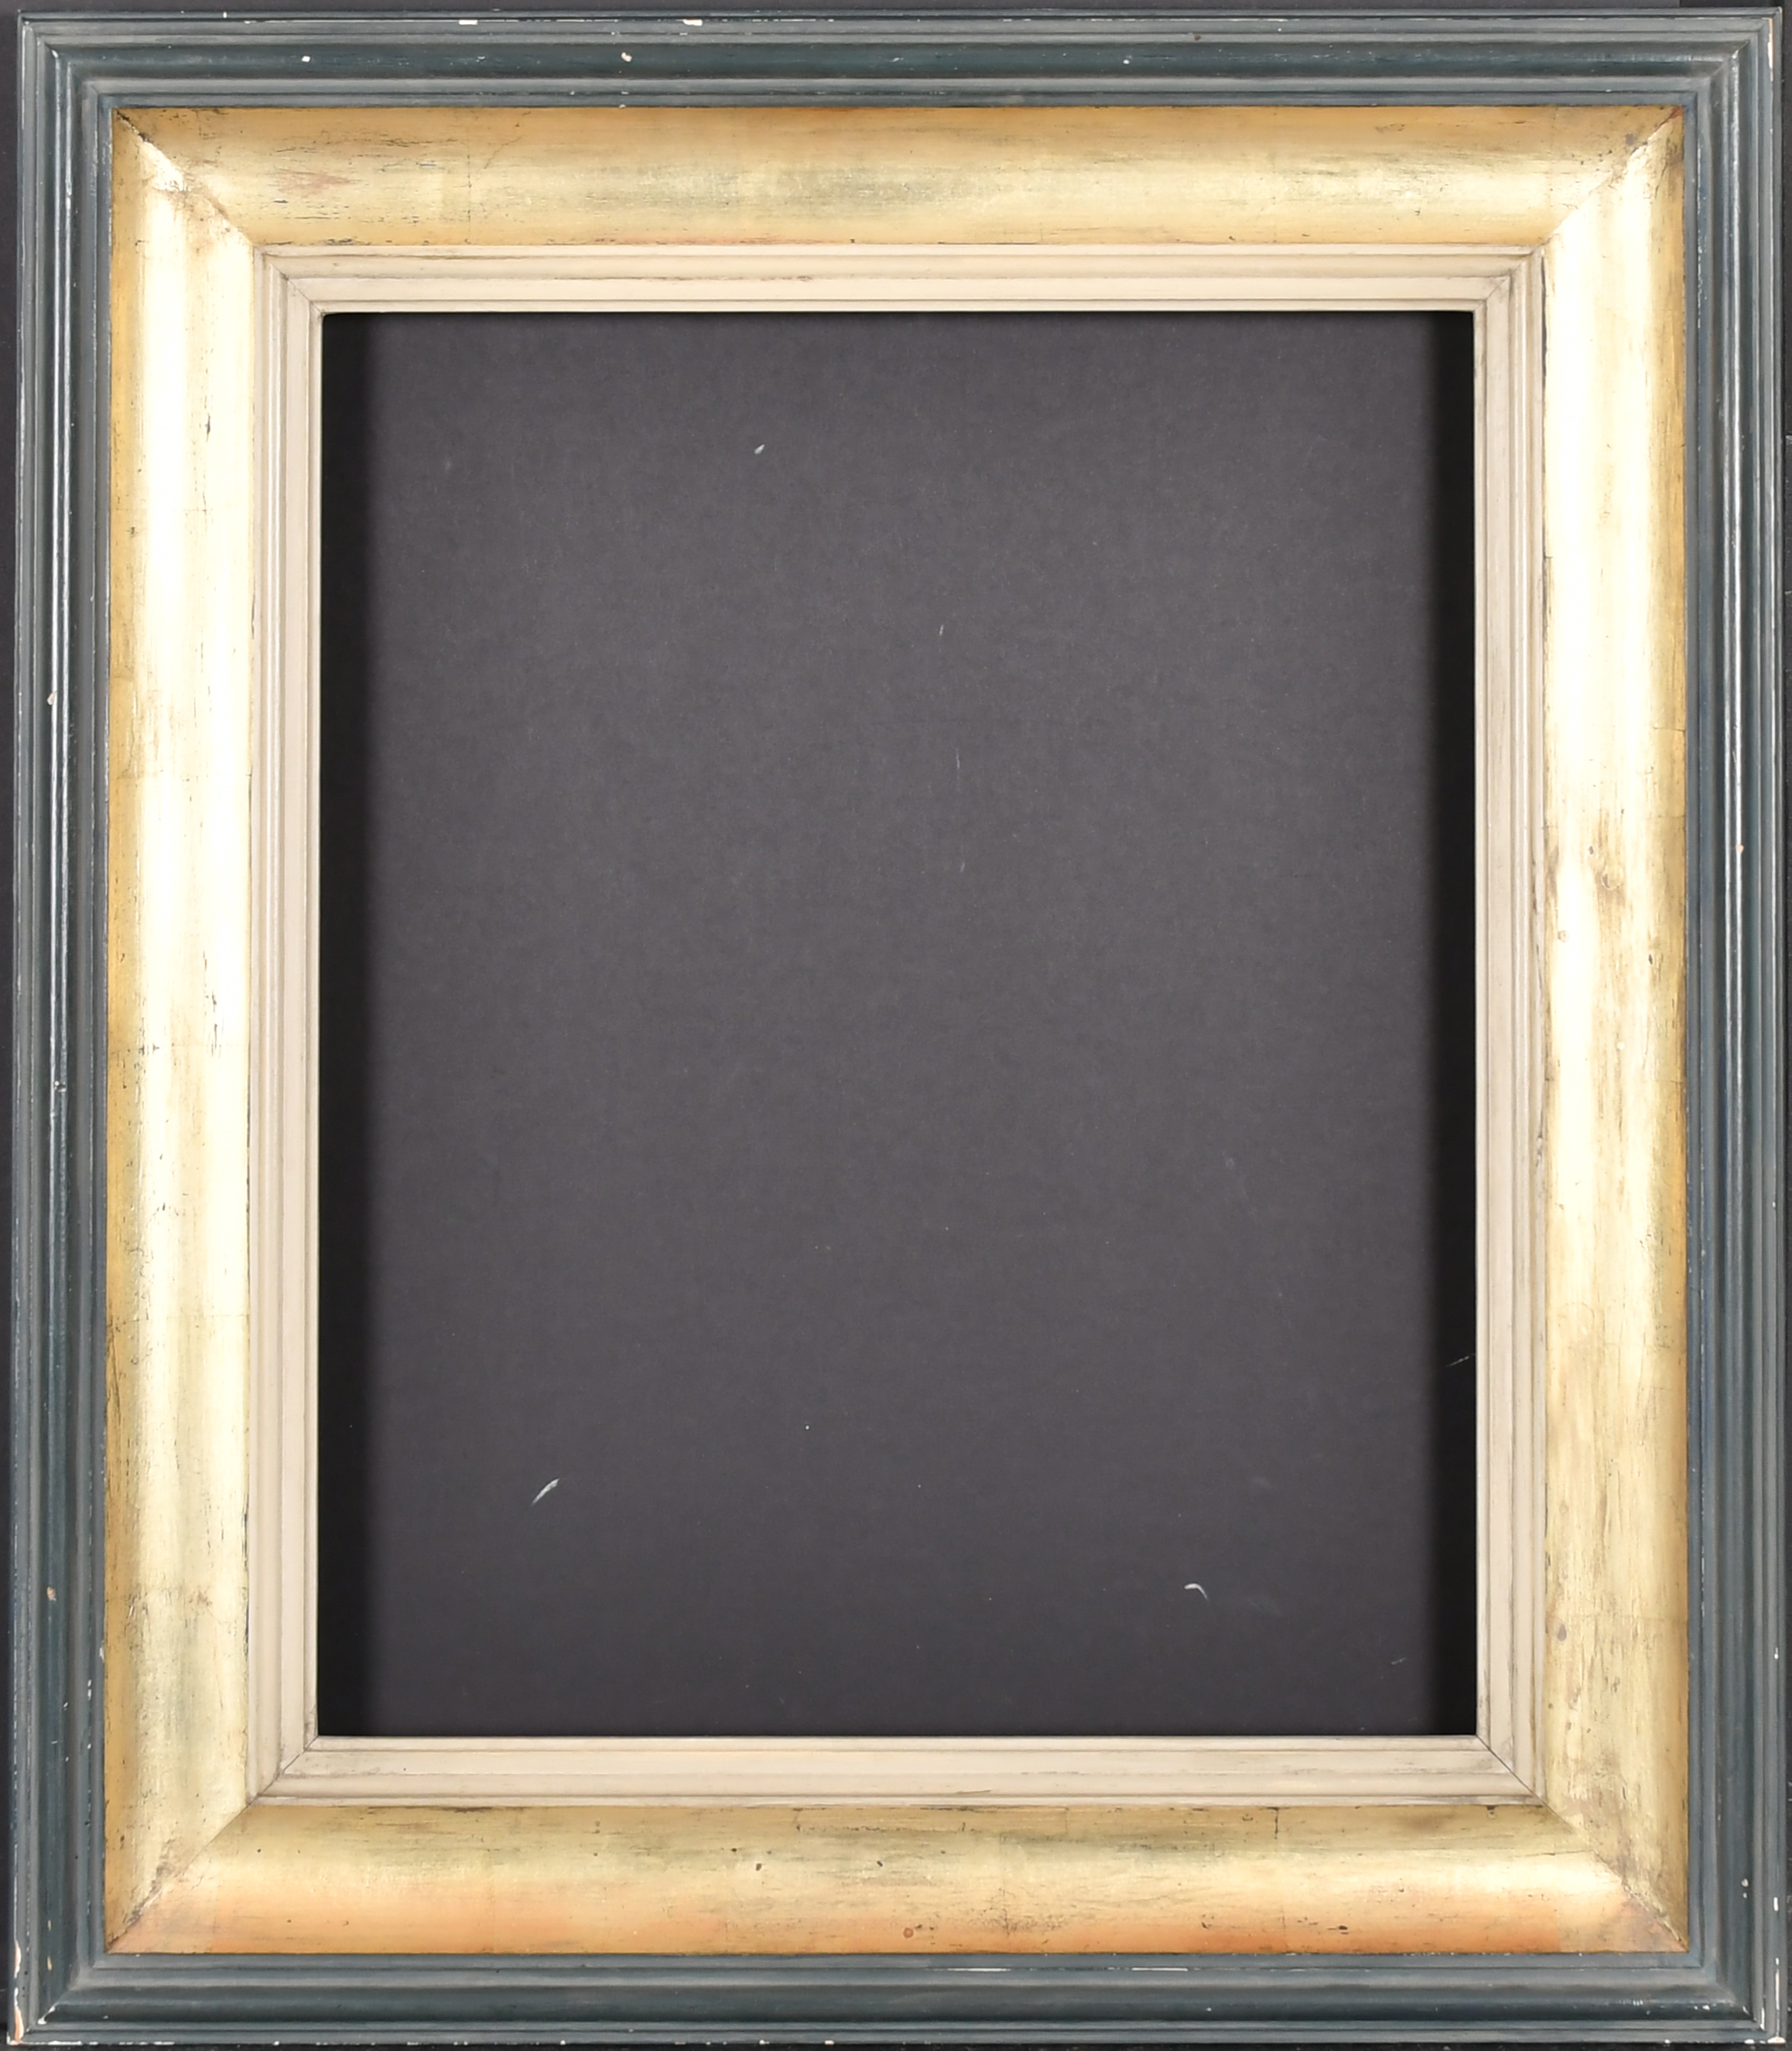 20th Century English School. A Hollow Painted Frame, rebate 17.25" x 14" (43.8 x 35.5cm) - Image 2 of 3